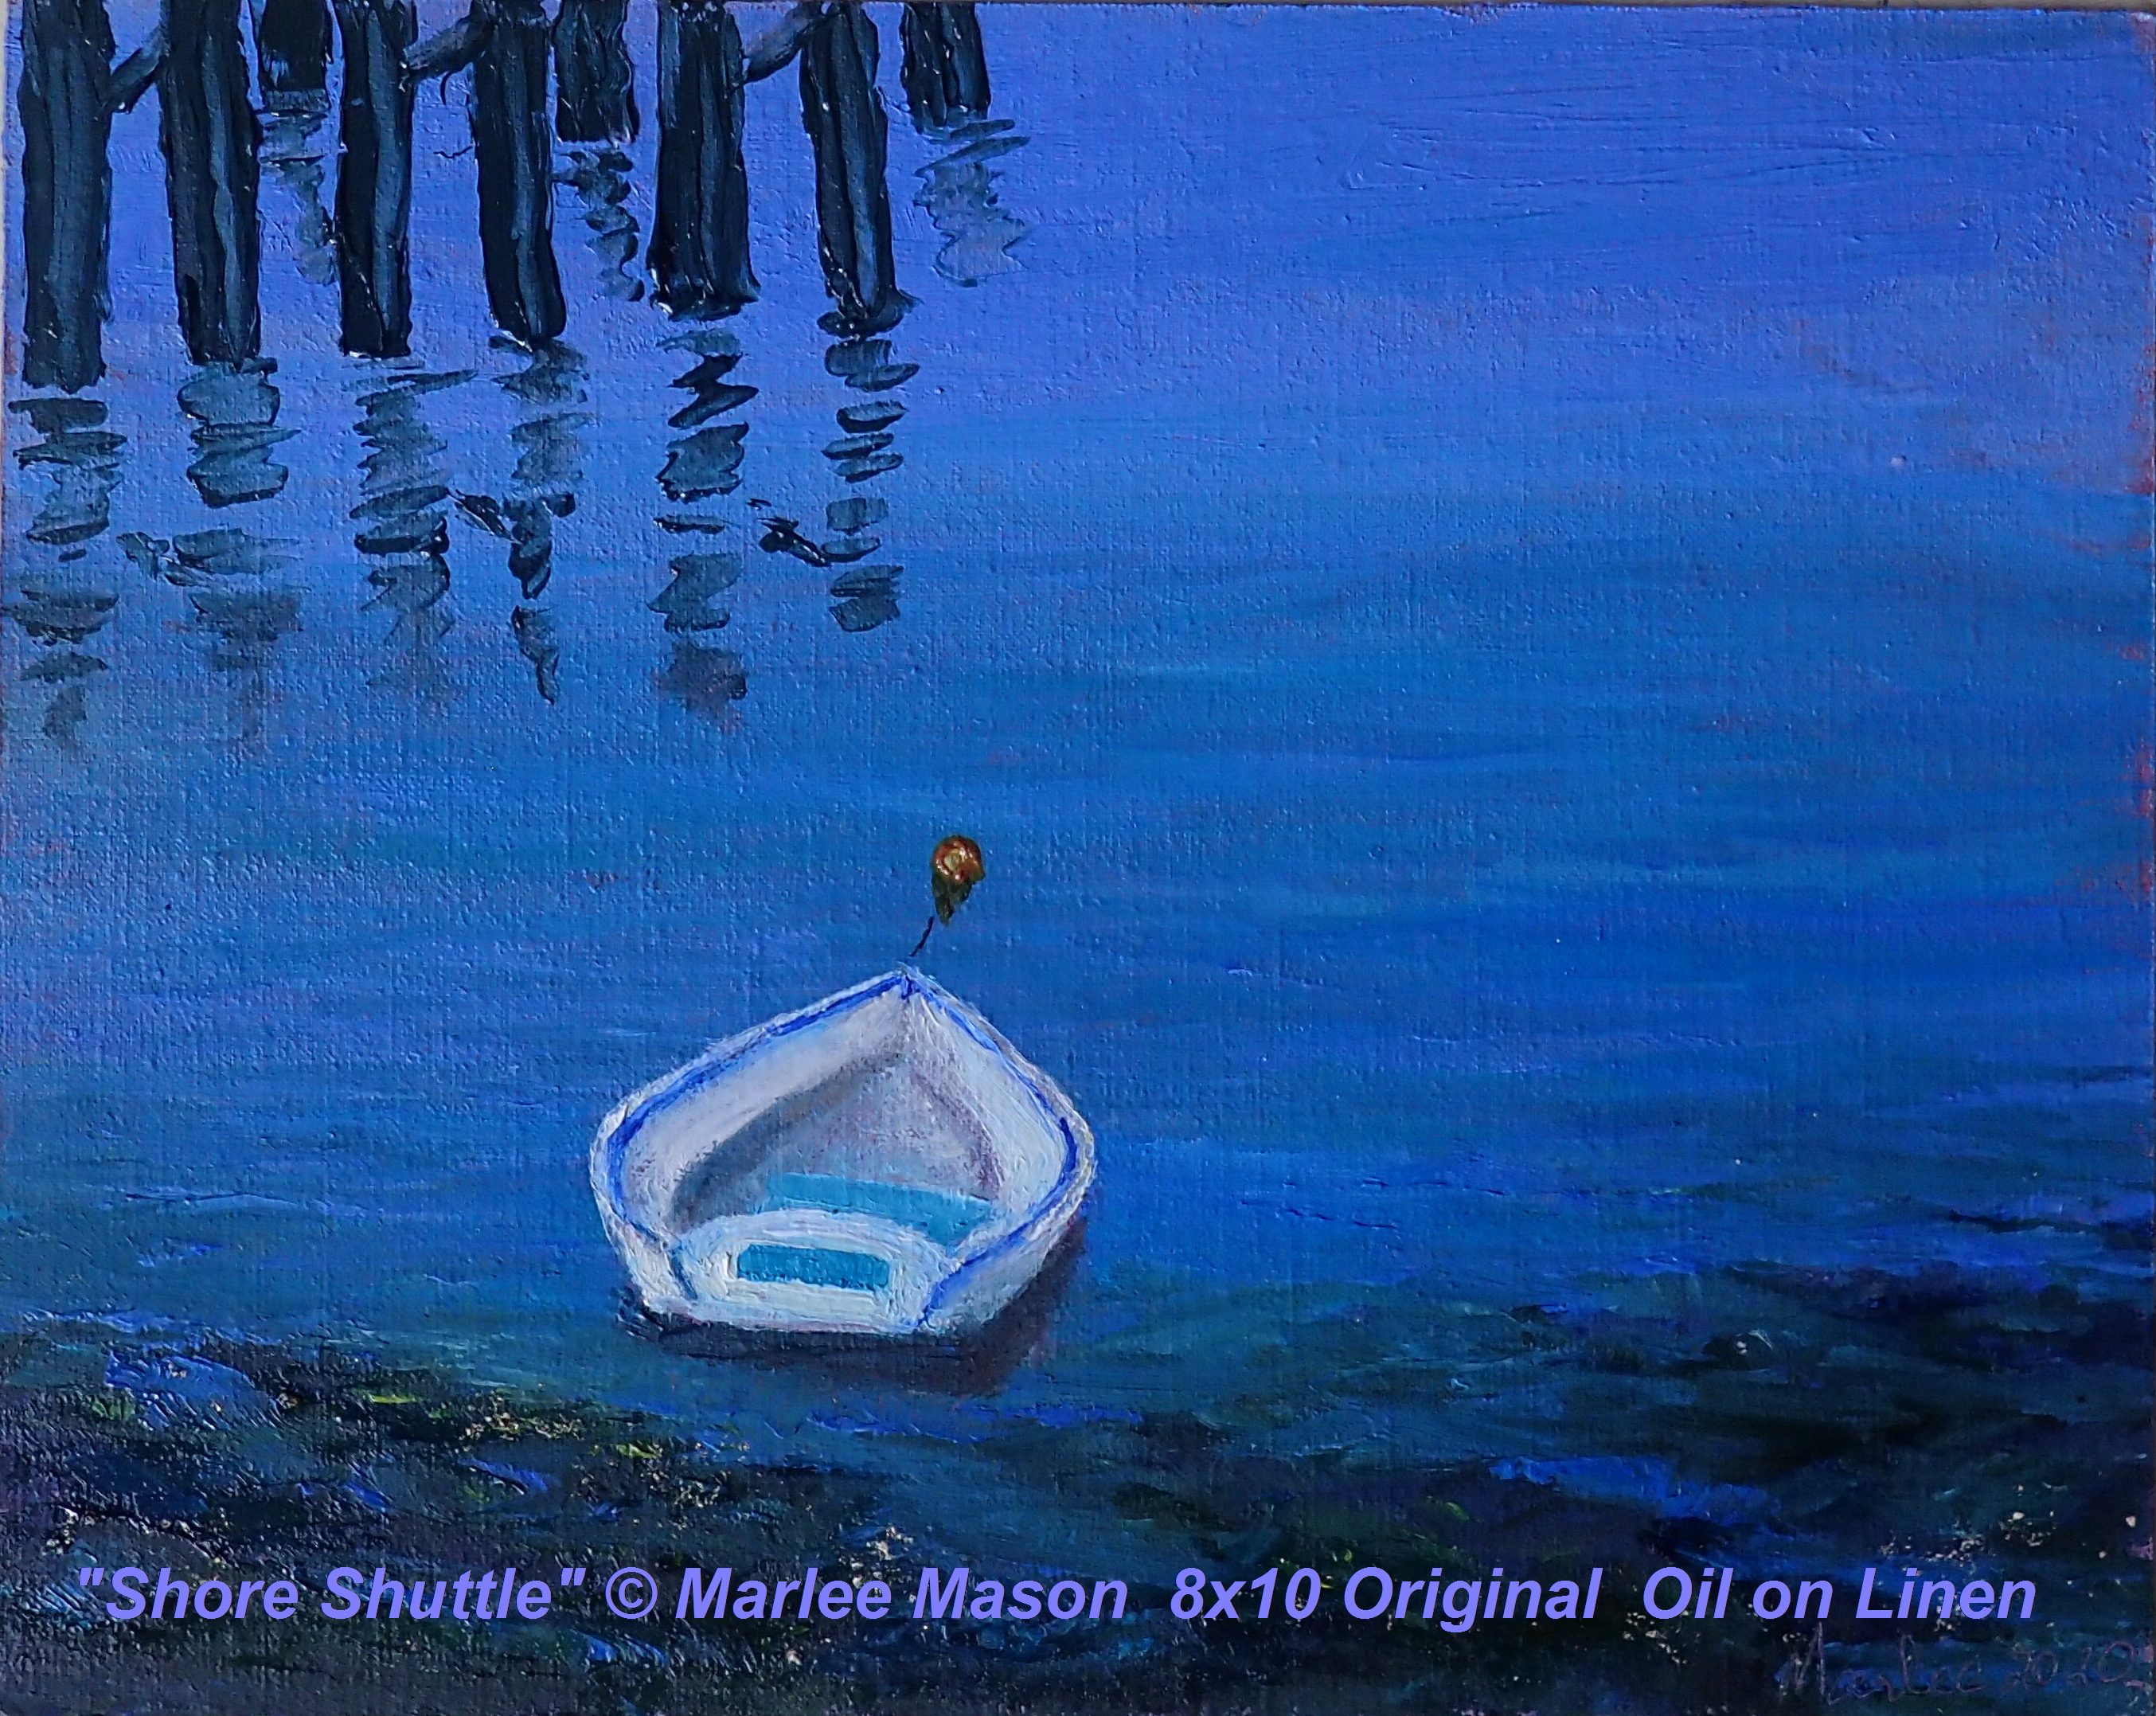 Original Oil 8x10" on linen canvas © Marlee Mason The small dinghy is an essential life enhancing and sometimes life saving vessel to carry passengers from mother ship to shore for island exploration